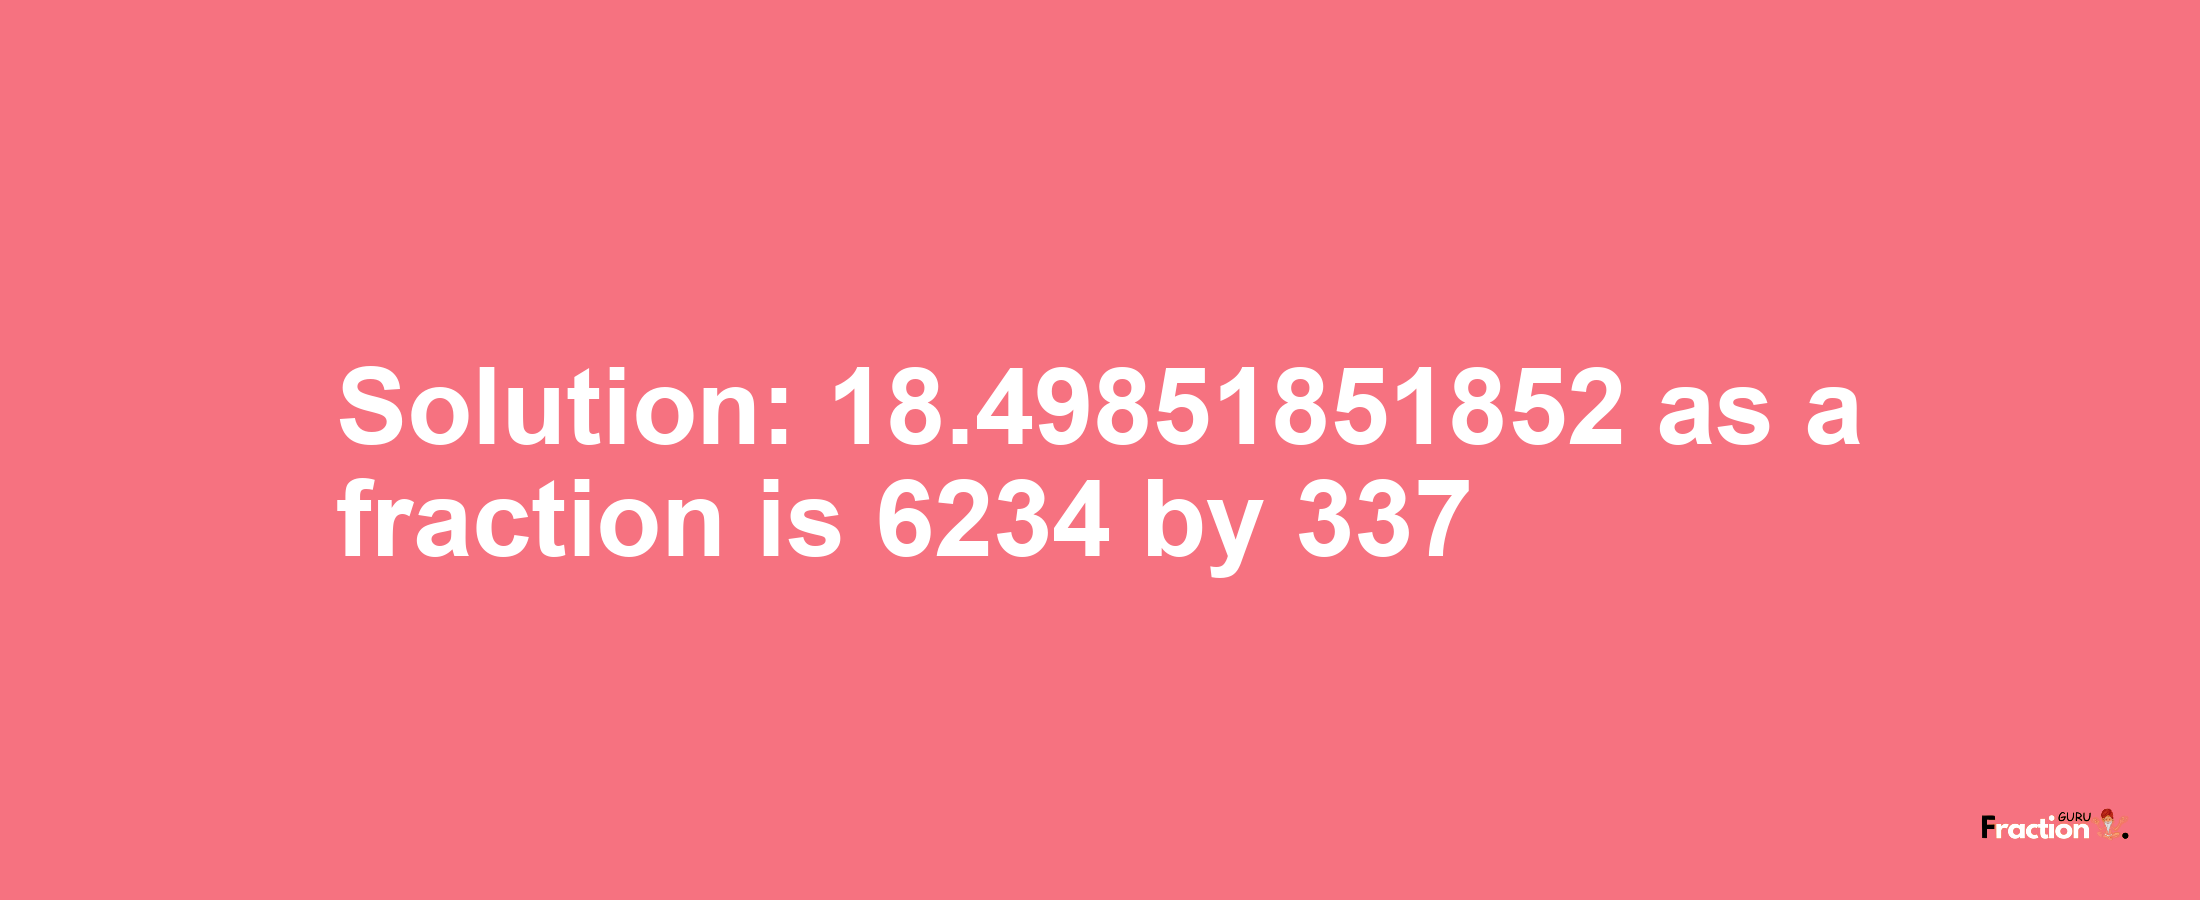 Solution:18.49851851852 as a fraction is 6234/337